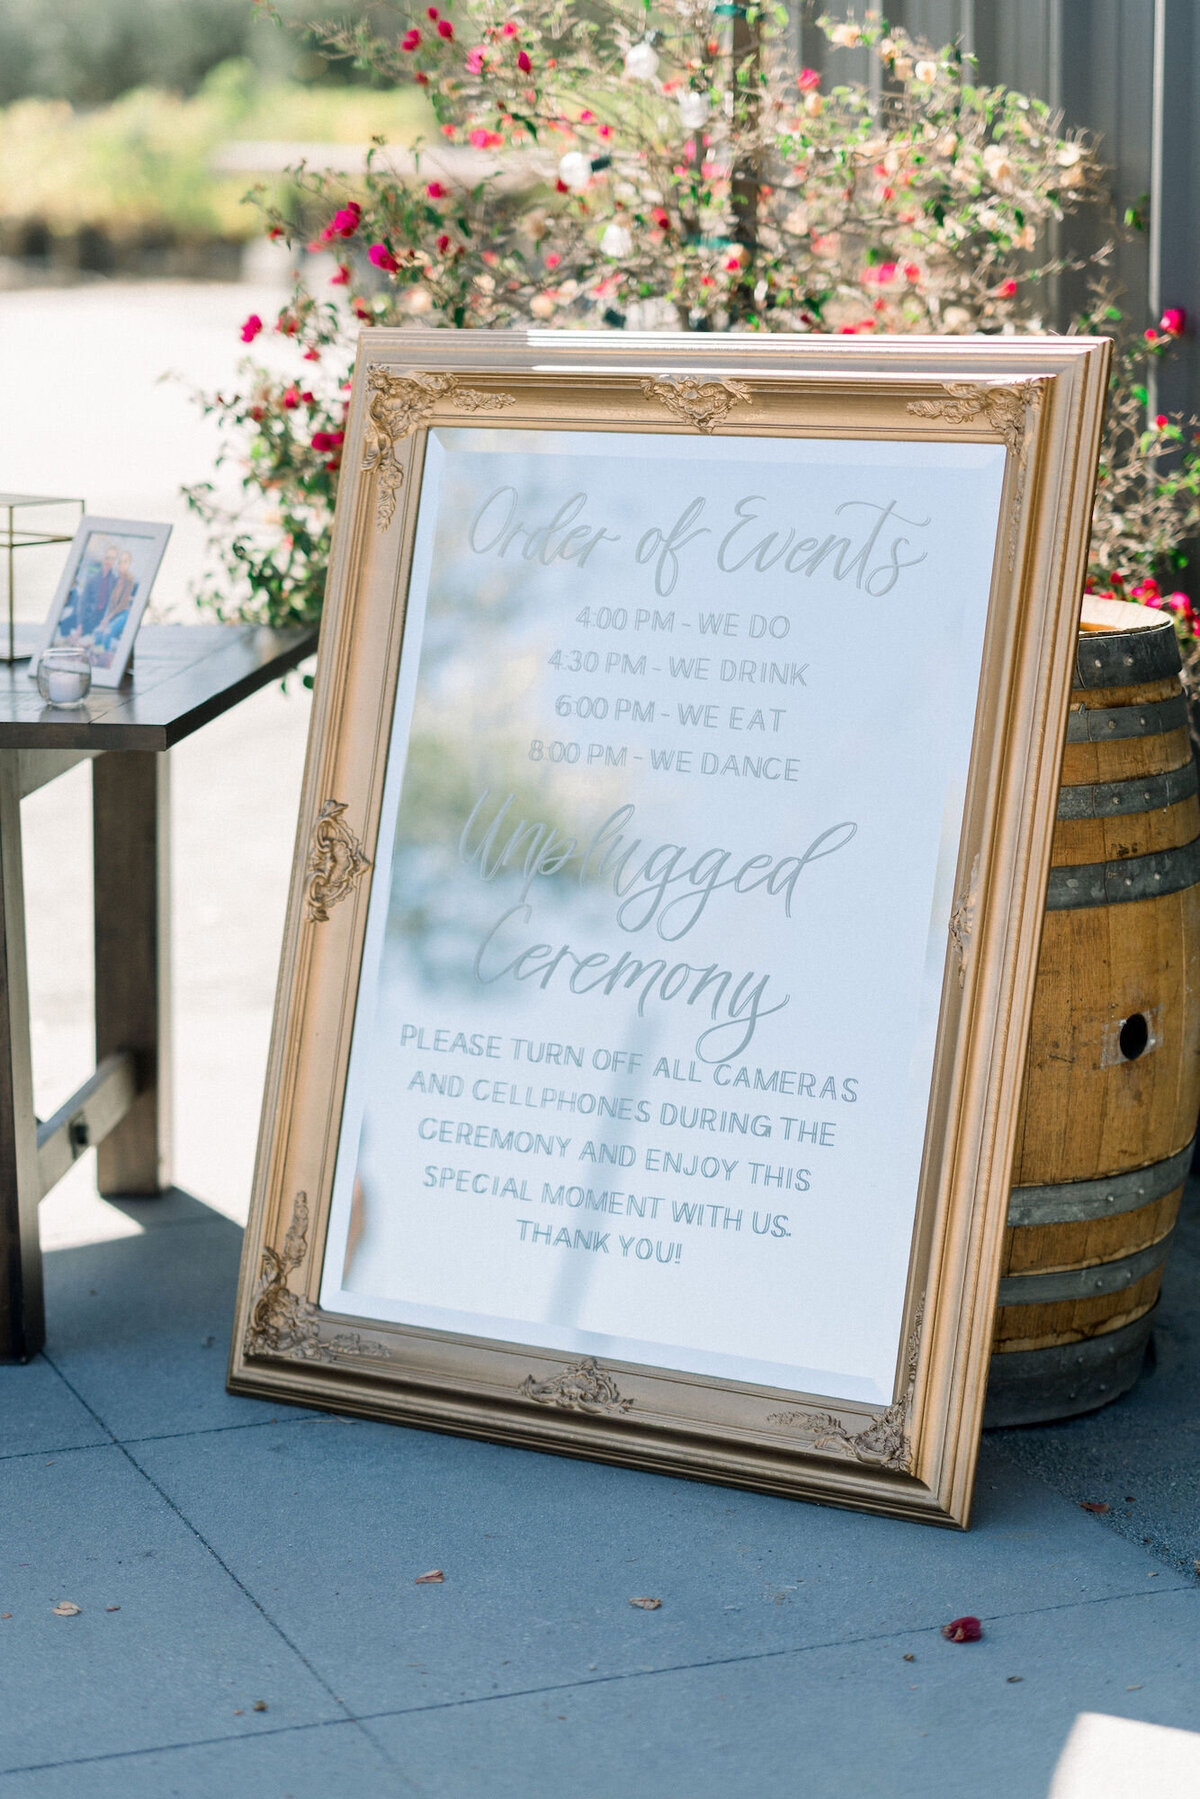 Unplugged sign in handwritten calligraphy on gold framed mirror